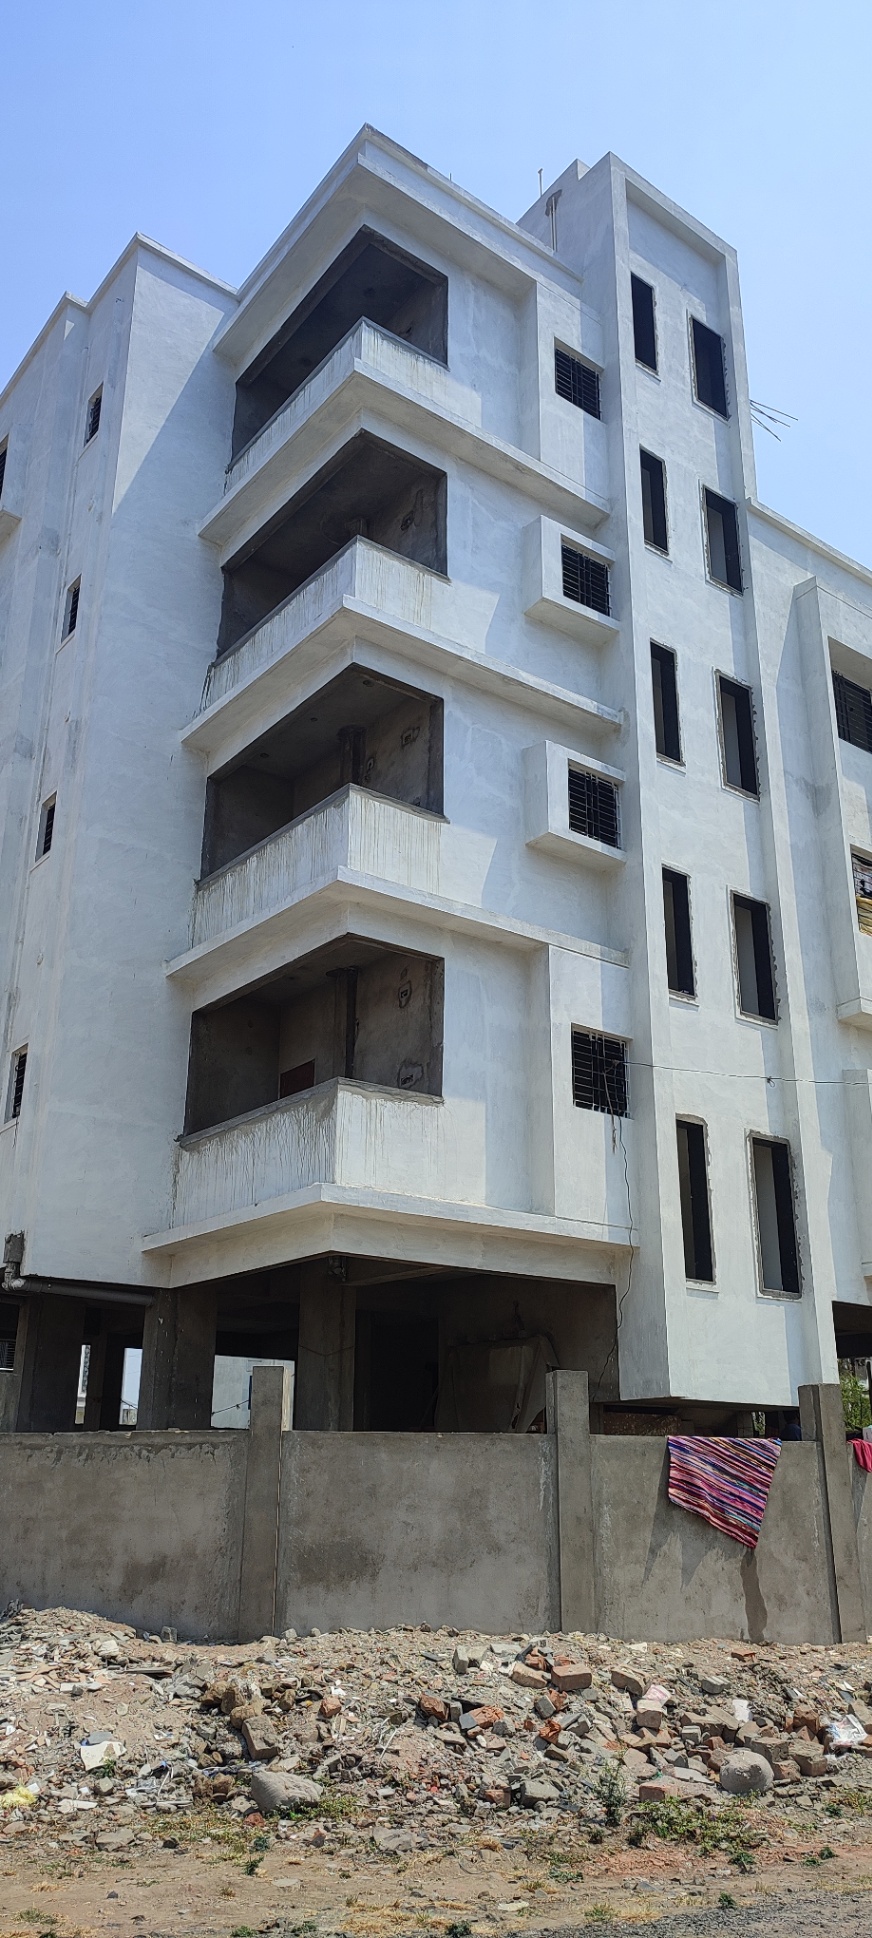 2 Bed/ 2 Bath Sell Apartment/ Flat; 899 sq. ft. carpet area; New Construction for sale @Narendra nagar